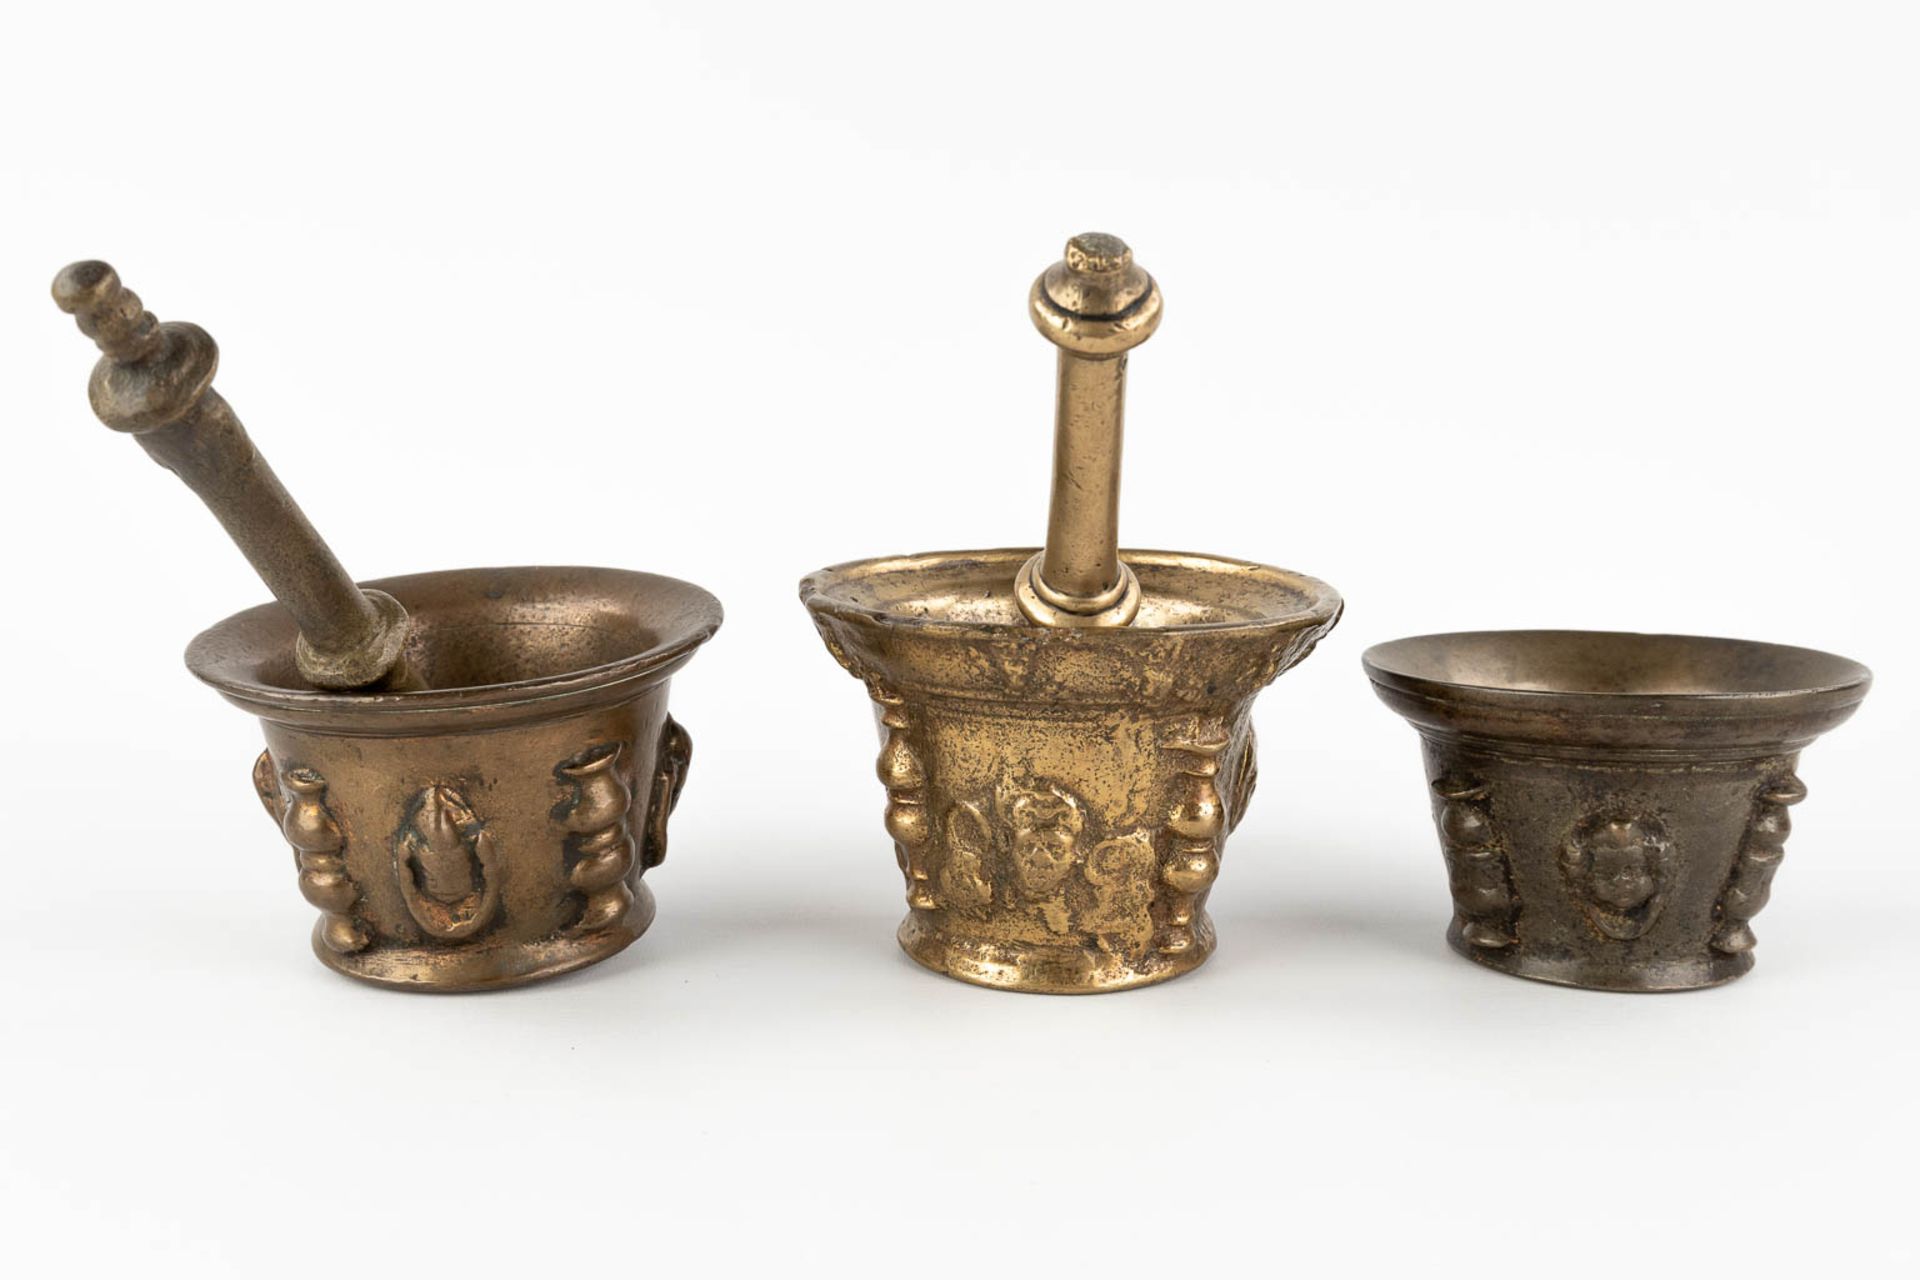 Three antique mortars with two pestles, bronze. Probably Spain, 17th/18th C. (H:9 x D:13 cm) - Image 4 of 12